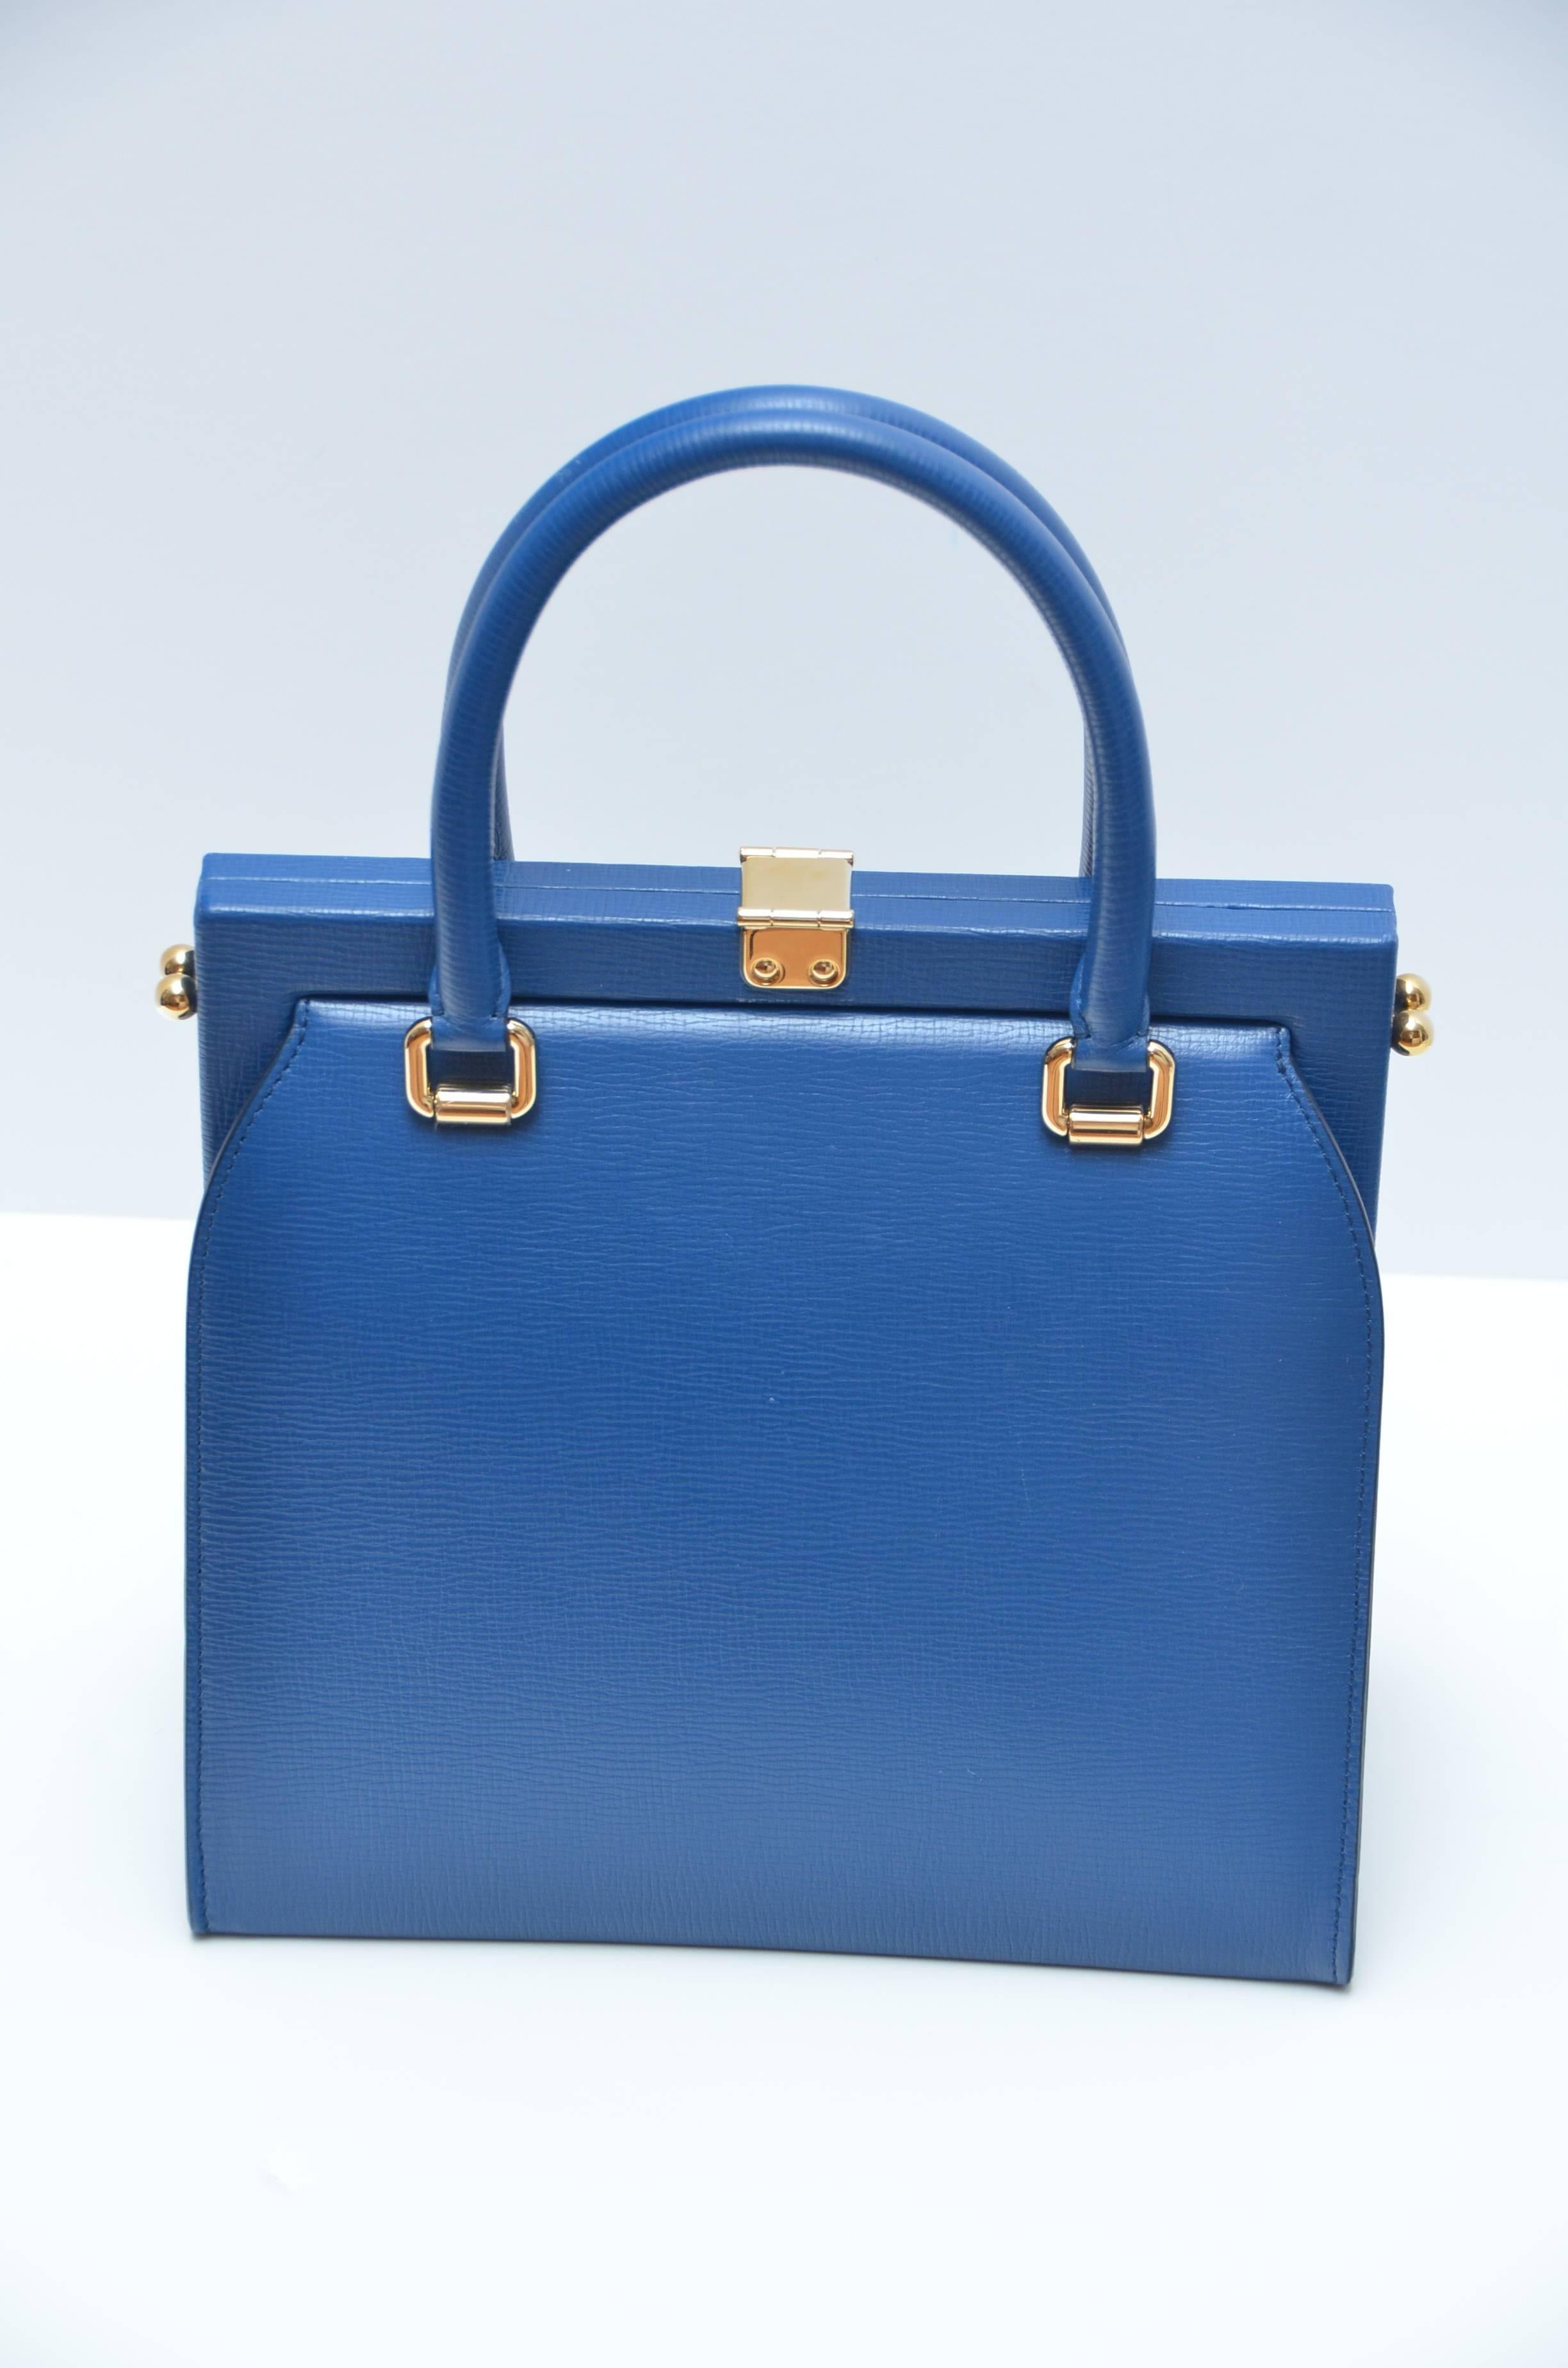 Dolce&Gabbana Pegasus Mini Pomellato Runway Handbag  
Blu Marino color.
Shoulder strap included.
New with tags.Couple minor marks on leather but bag still have clear plastic on hardware inside and lock in the front as well as tags